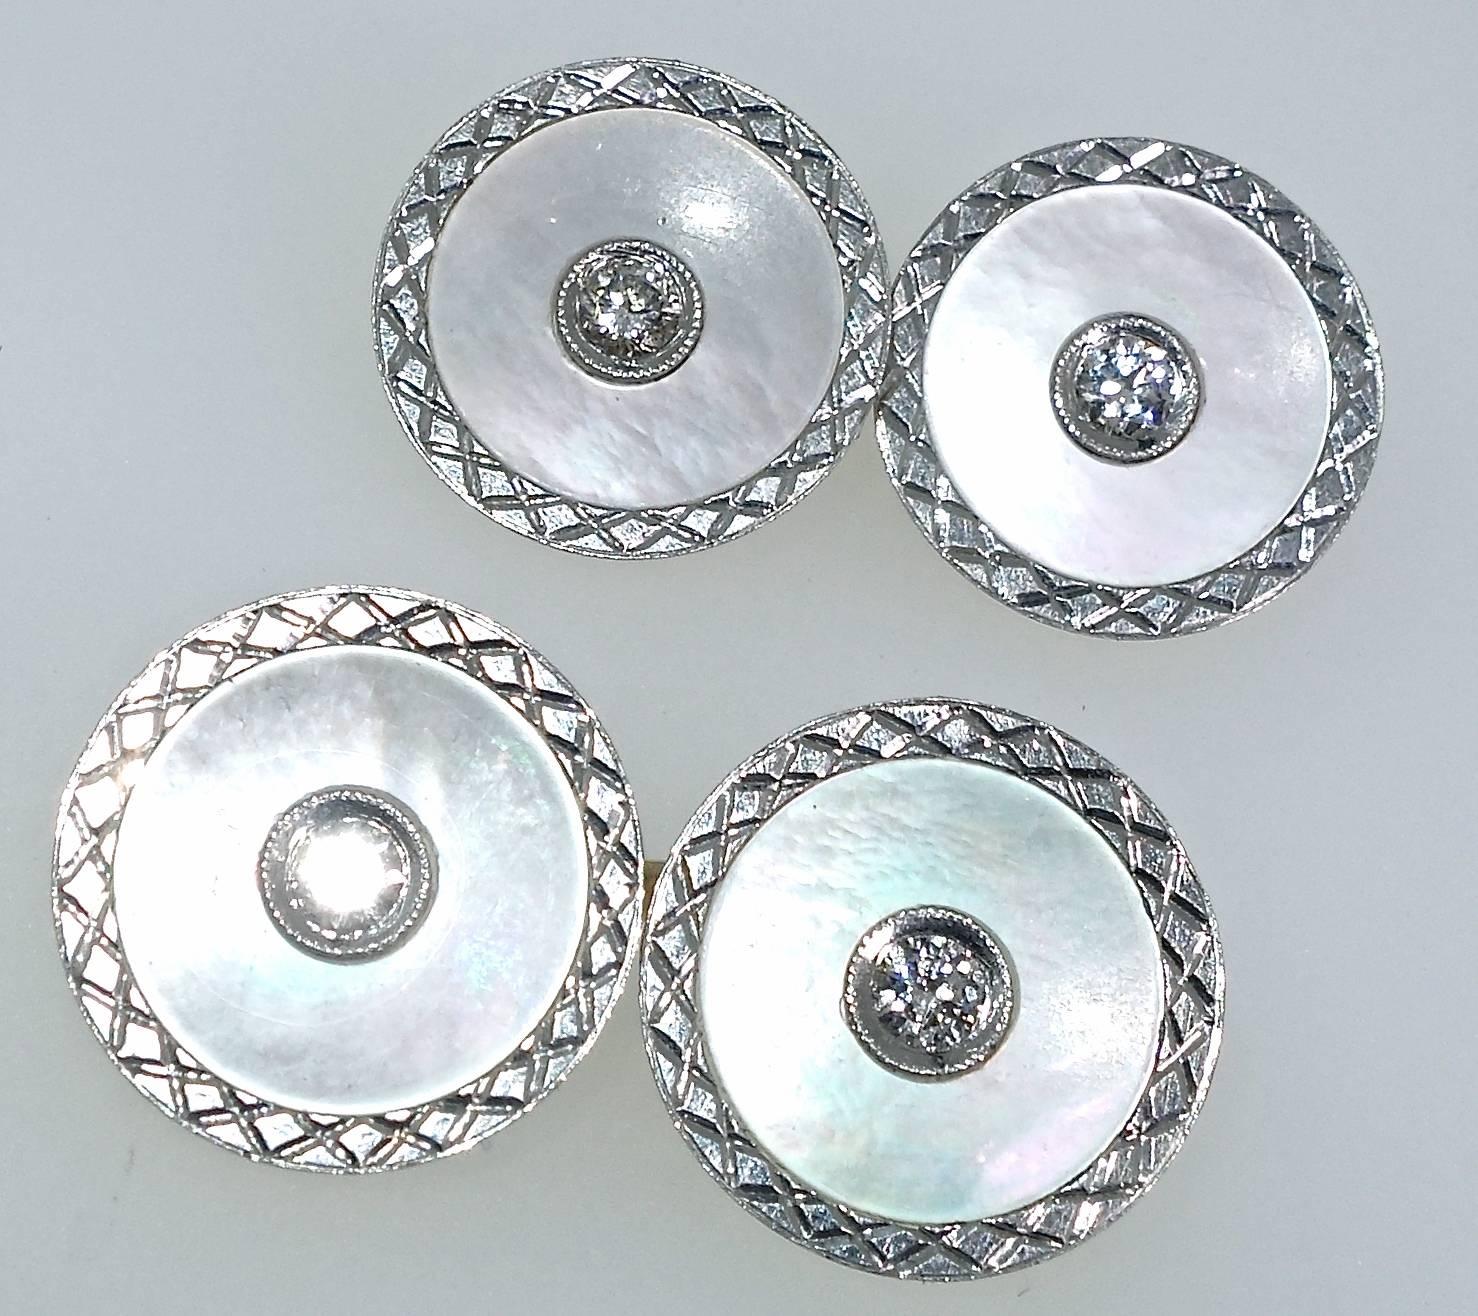 Platinum cufflinks with engraved edges surrounding white mother of pearl  and a bead set diamond in the center and backed with gold.  There are .33 cts. total weight of the white European cut diamonds.  Early Art Deco and in fine condition. 